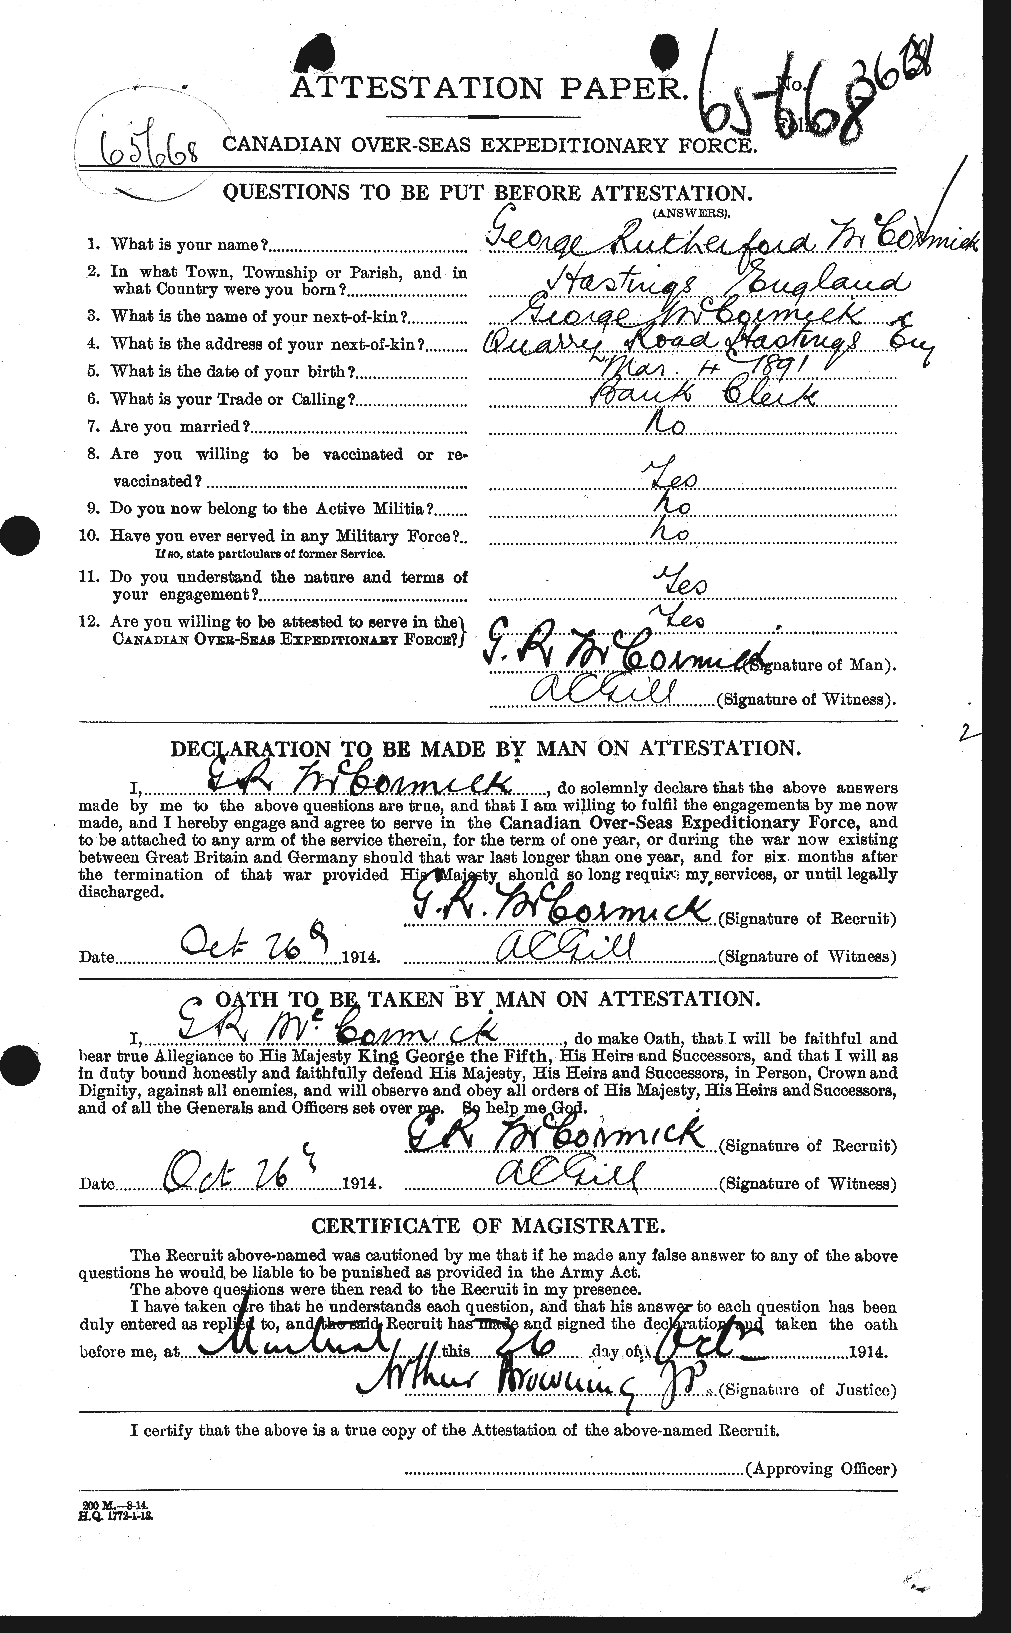 Personnel Records of the First World War - CEF 133748a